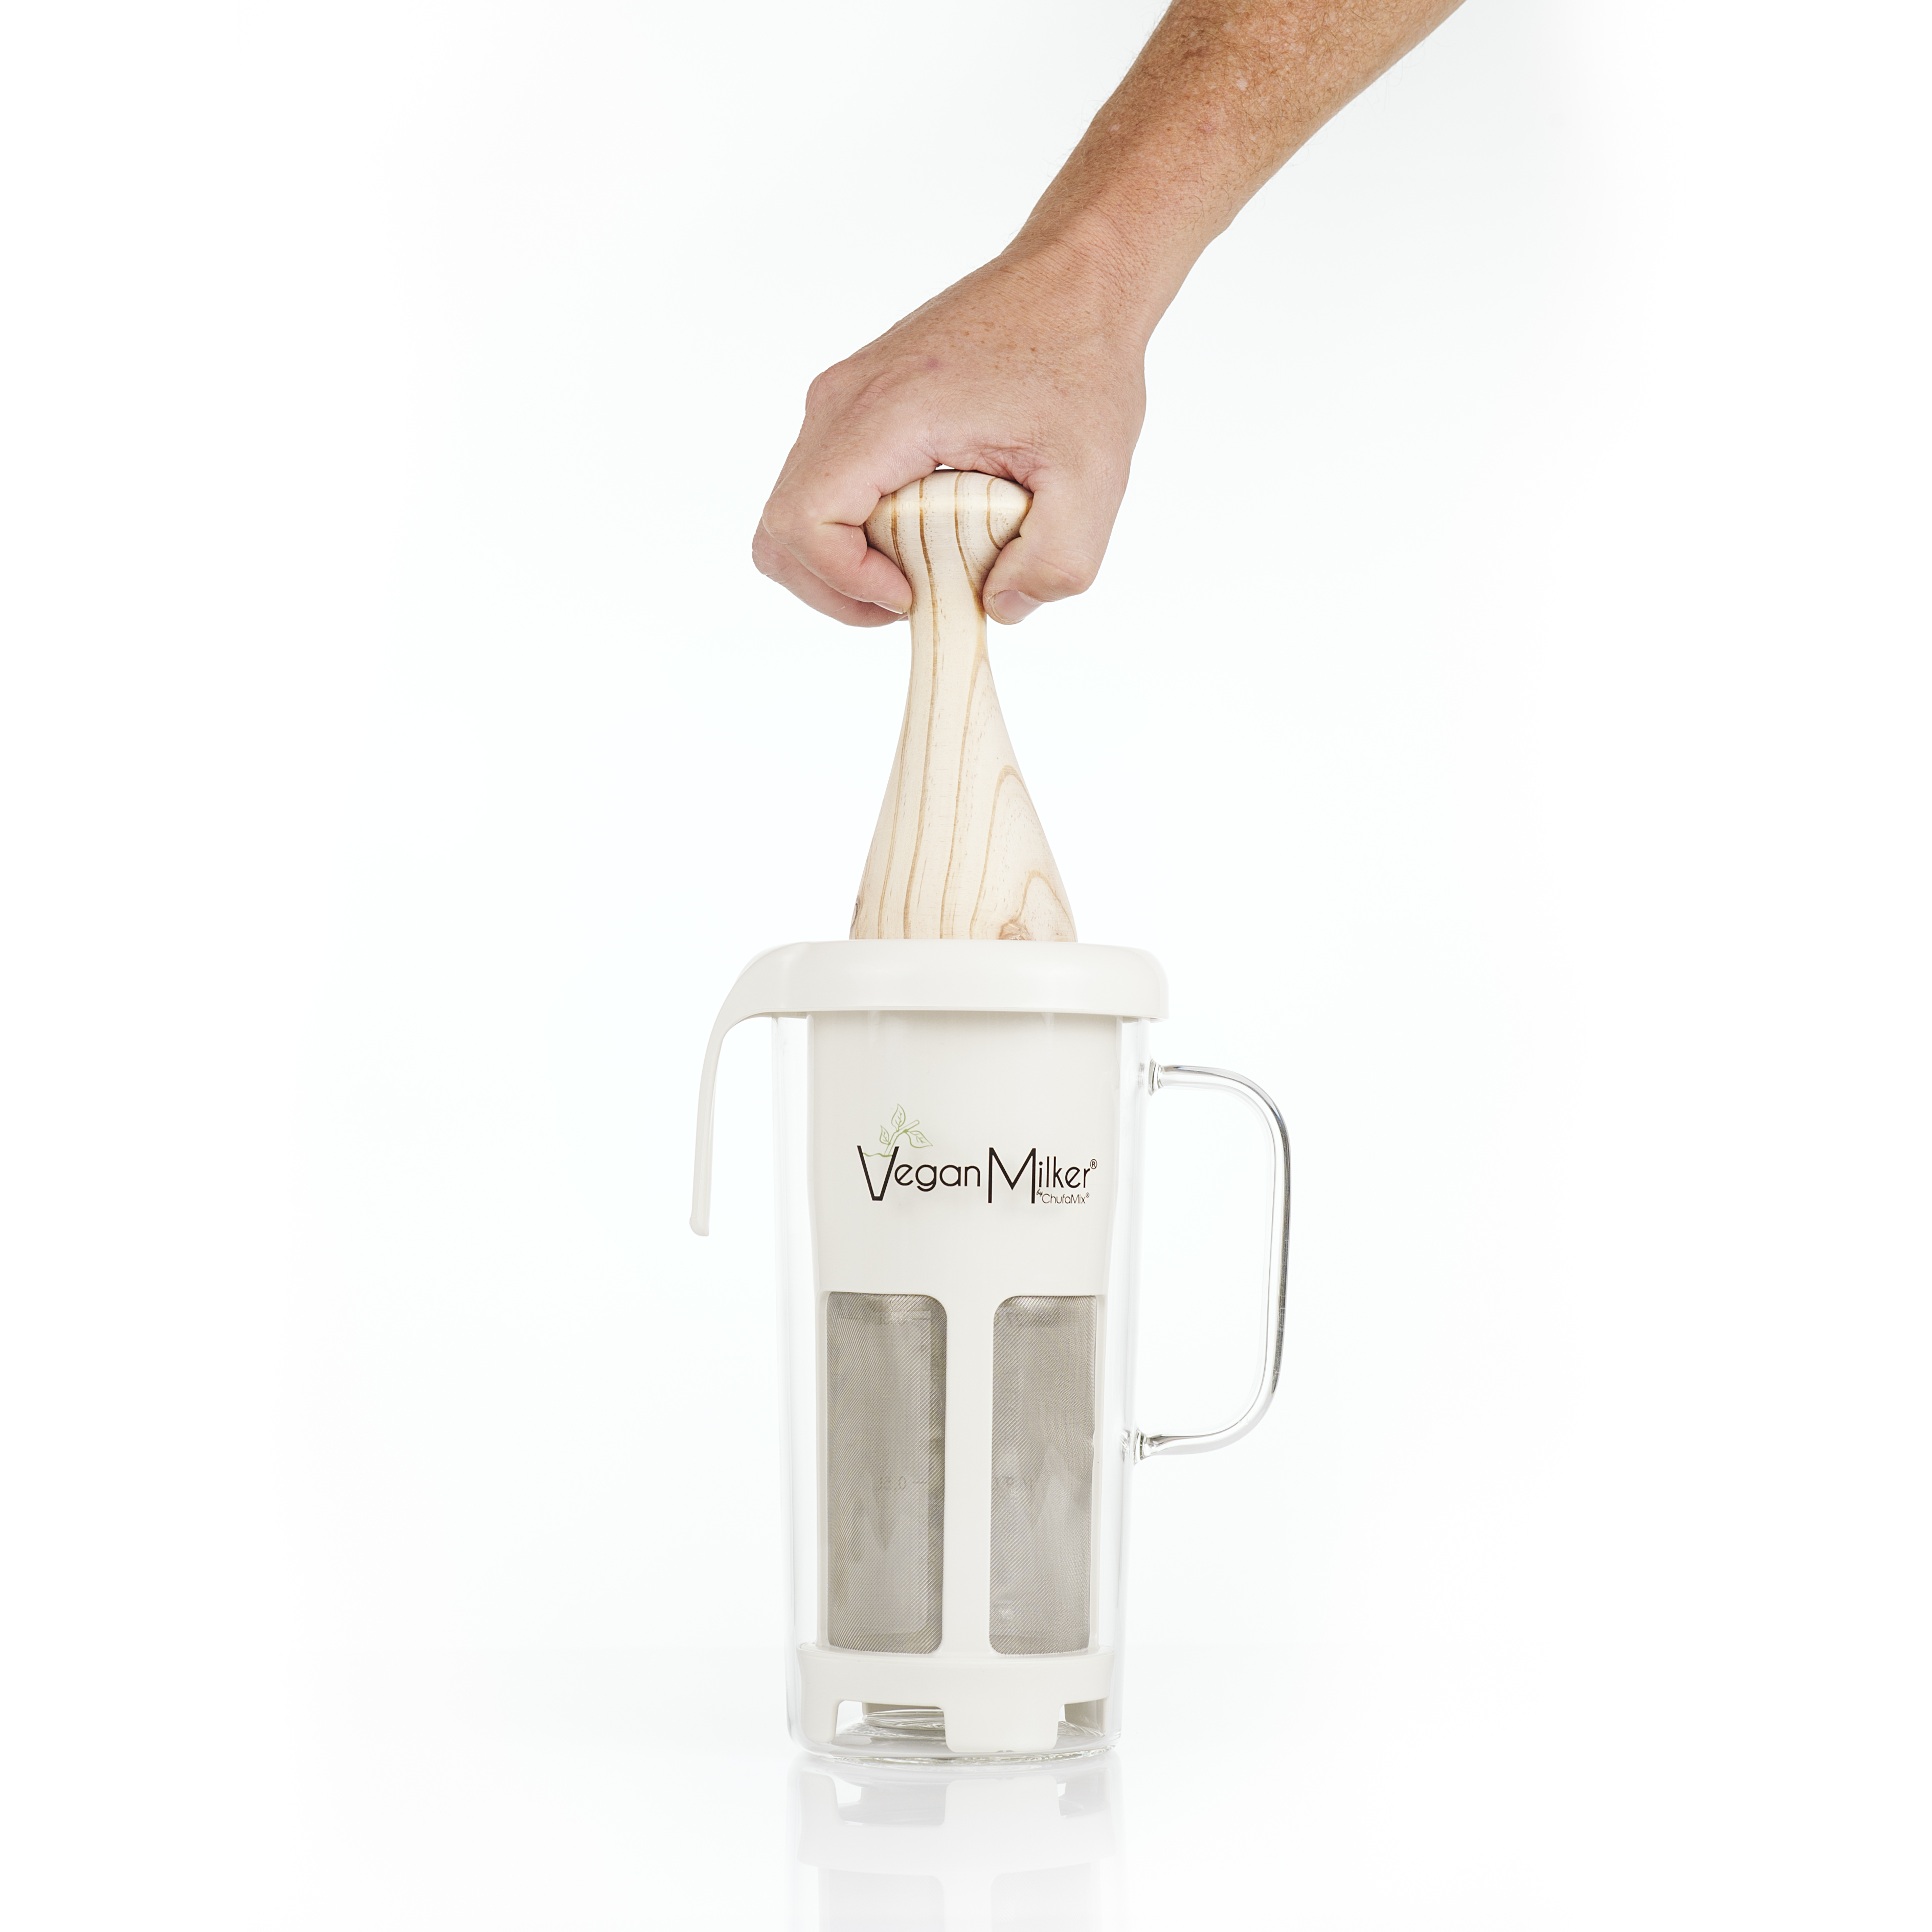 Vegan Milker by Chufamix, kitchen tool to make Plant Milks (soy, rice, oats  & nut milk maker) or Coffee (from whole beans). Made in Europe. Recipe